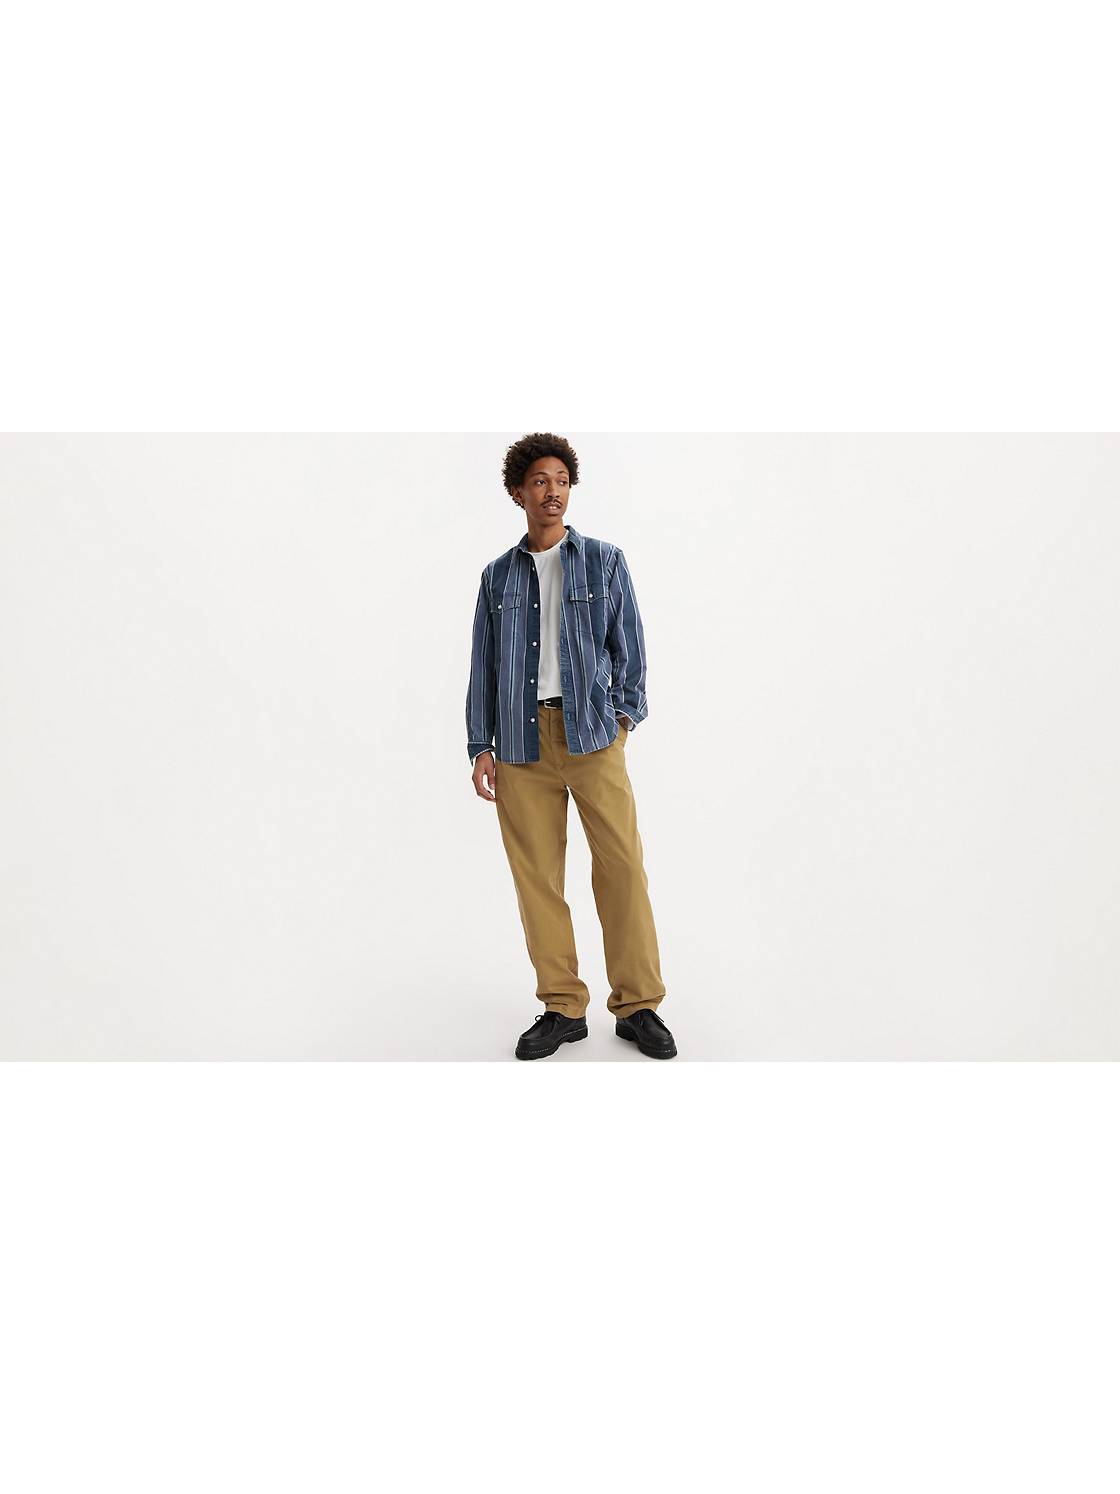 XX Chino Loose Straight Pleated Pants 1